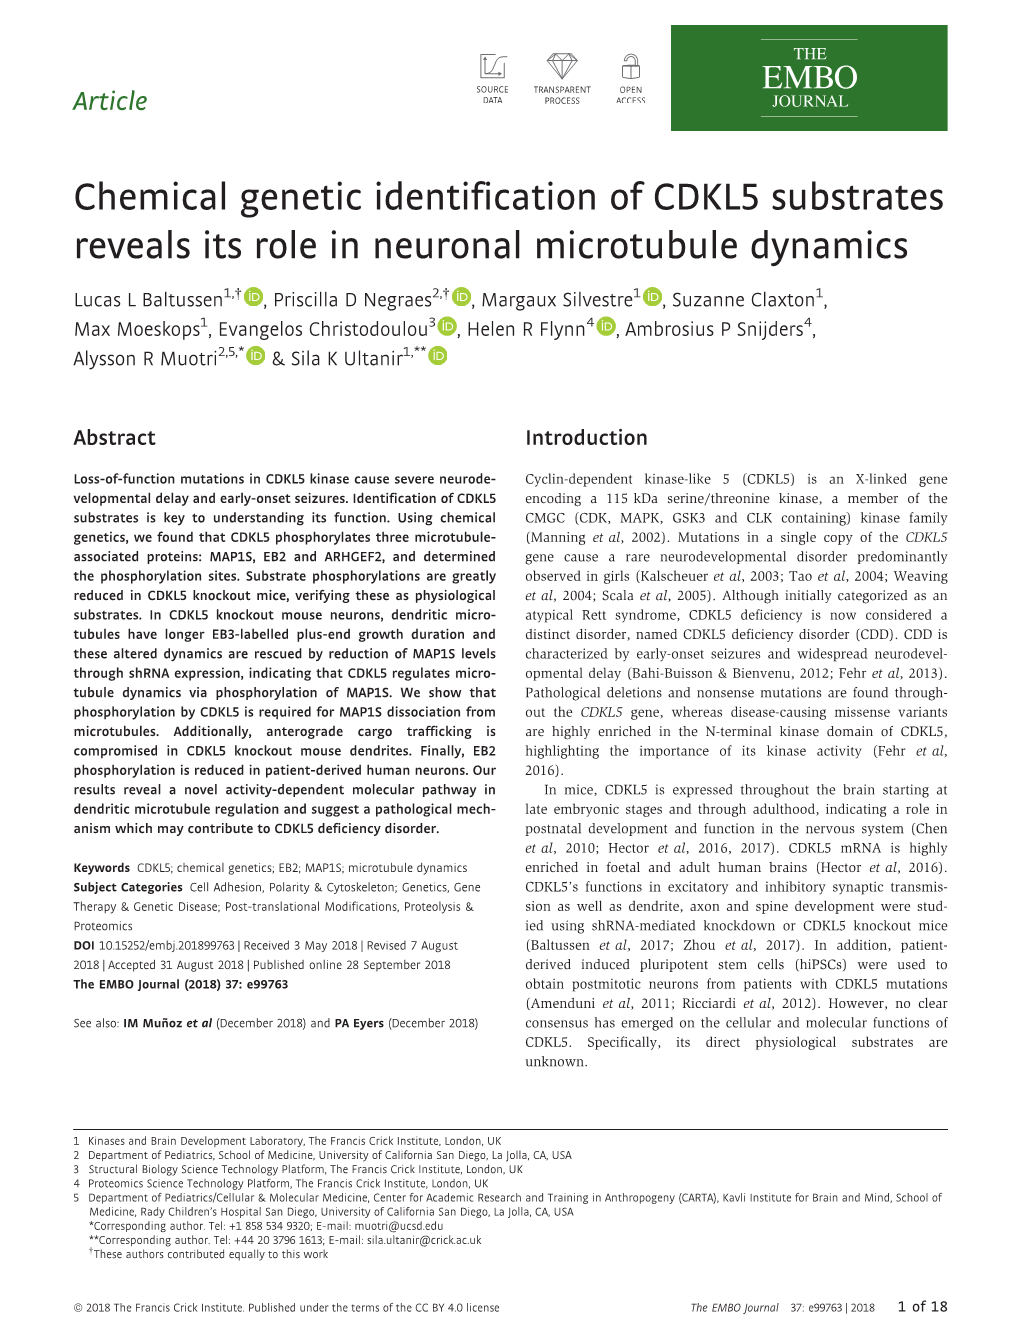 Chemical Genetic Identification of CDKL5 Substrates Reveals Its Role in Neuronal Microtubule Dynamics